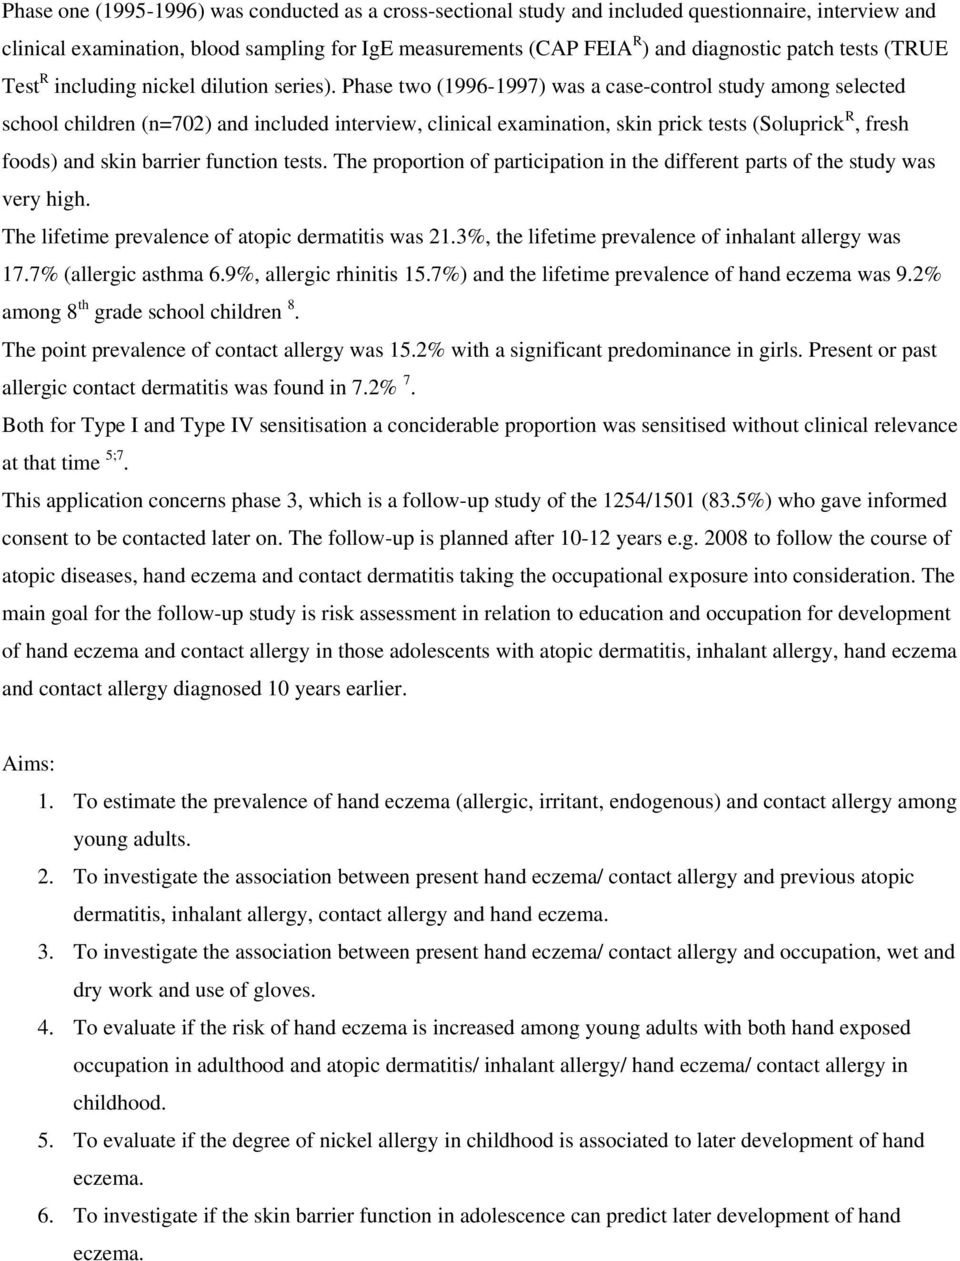 Phase two (1996-1997) was a case-control study among selected school children (n=702) and included interview, clinical examination, skin prick tests (Soluprick R, fresh foods) and skin barrier